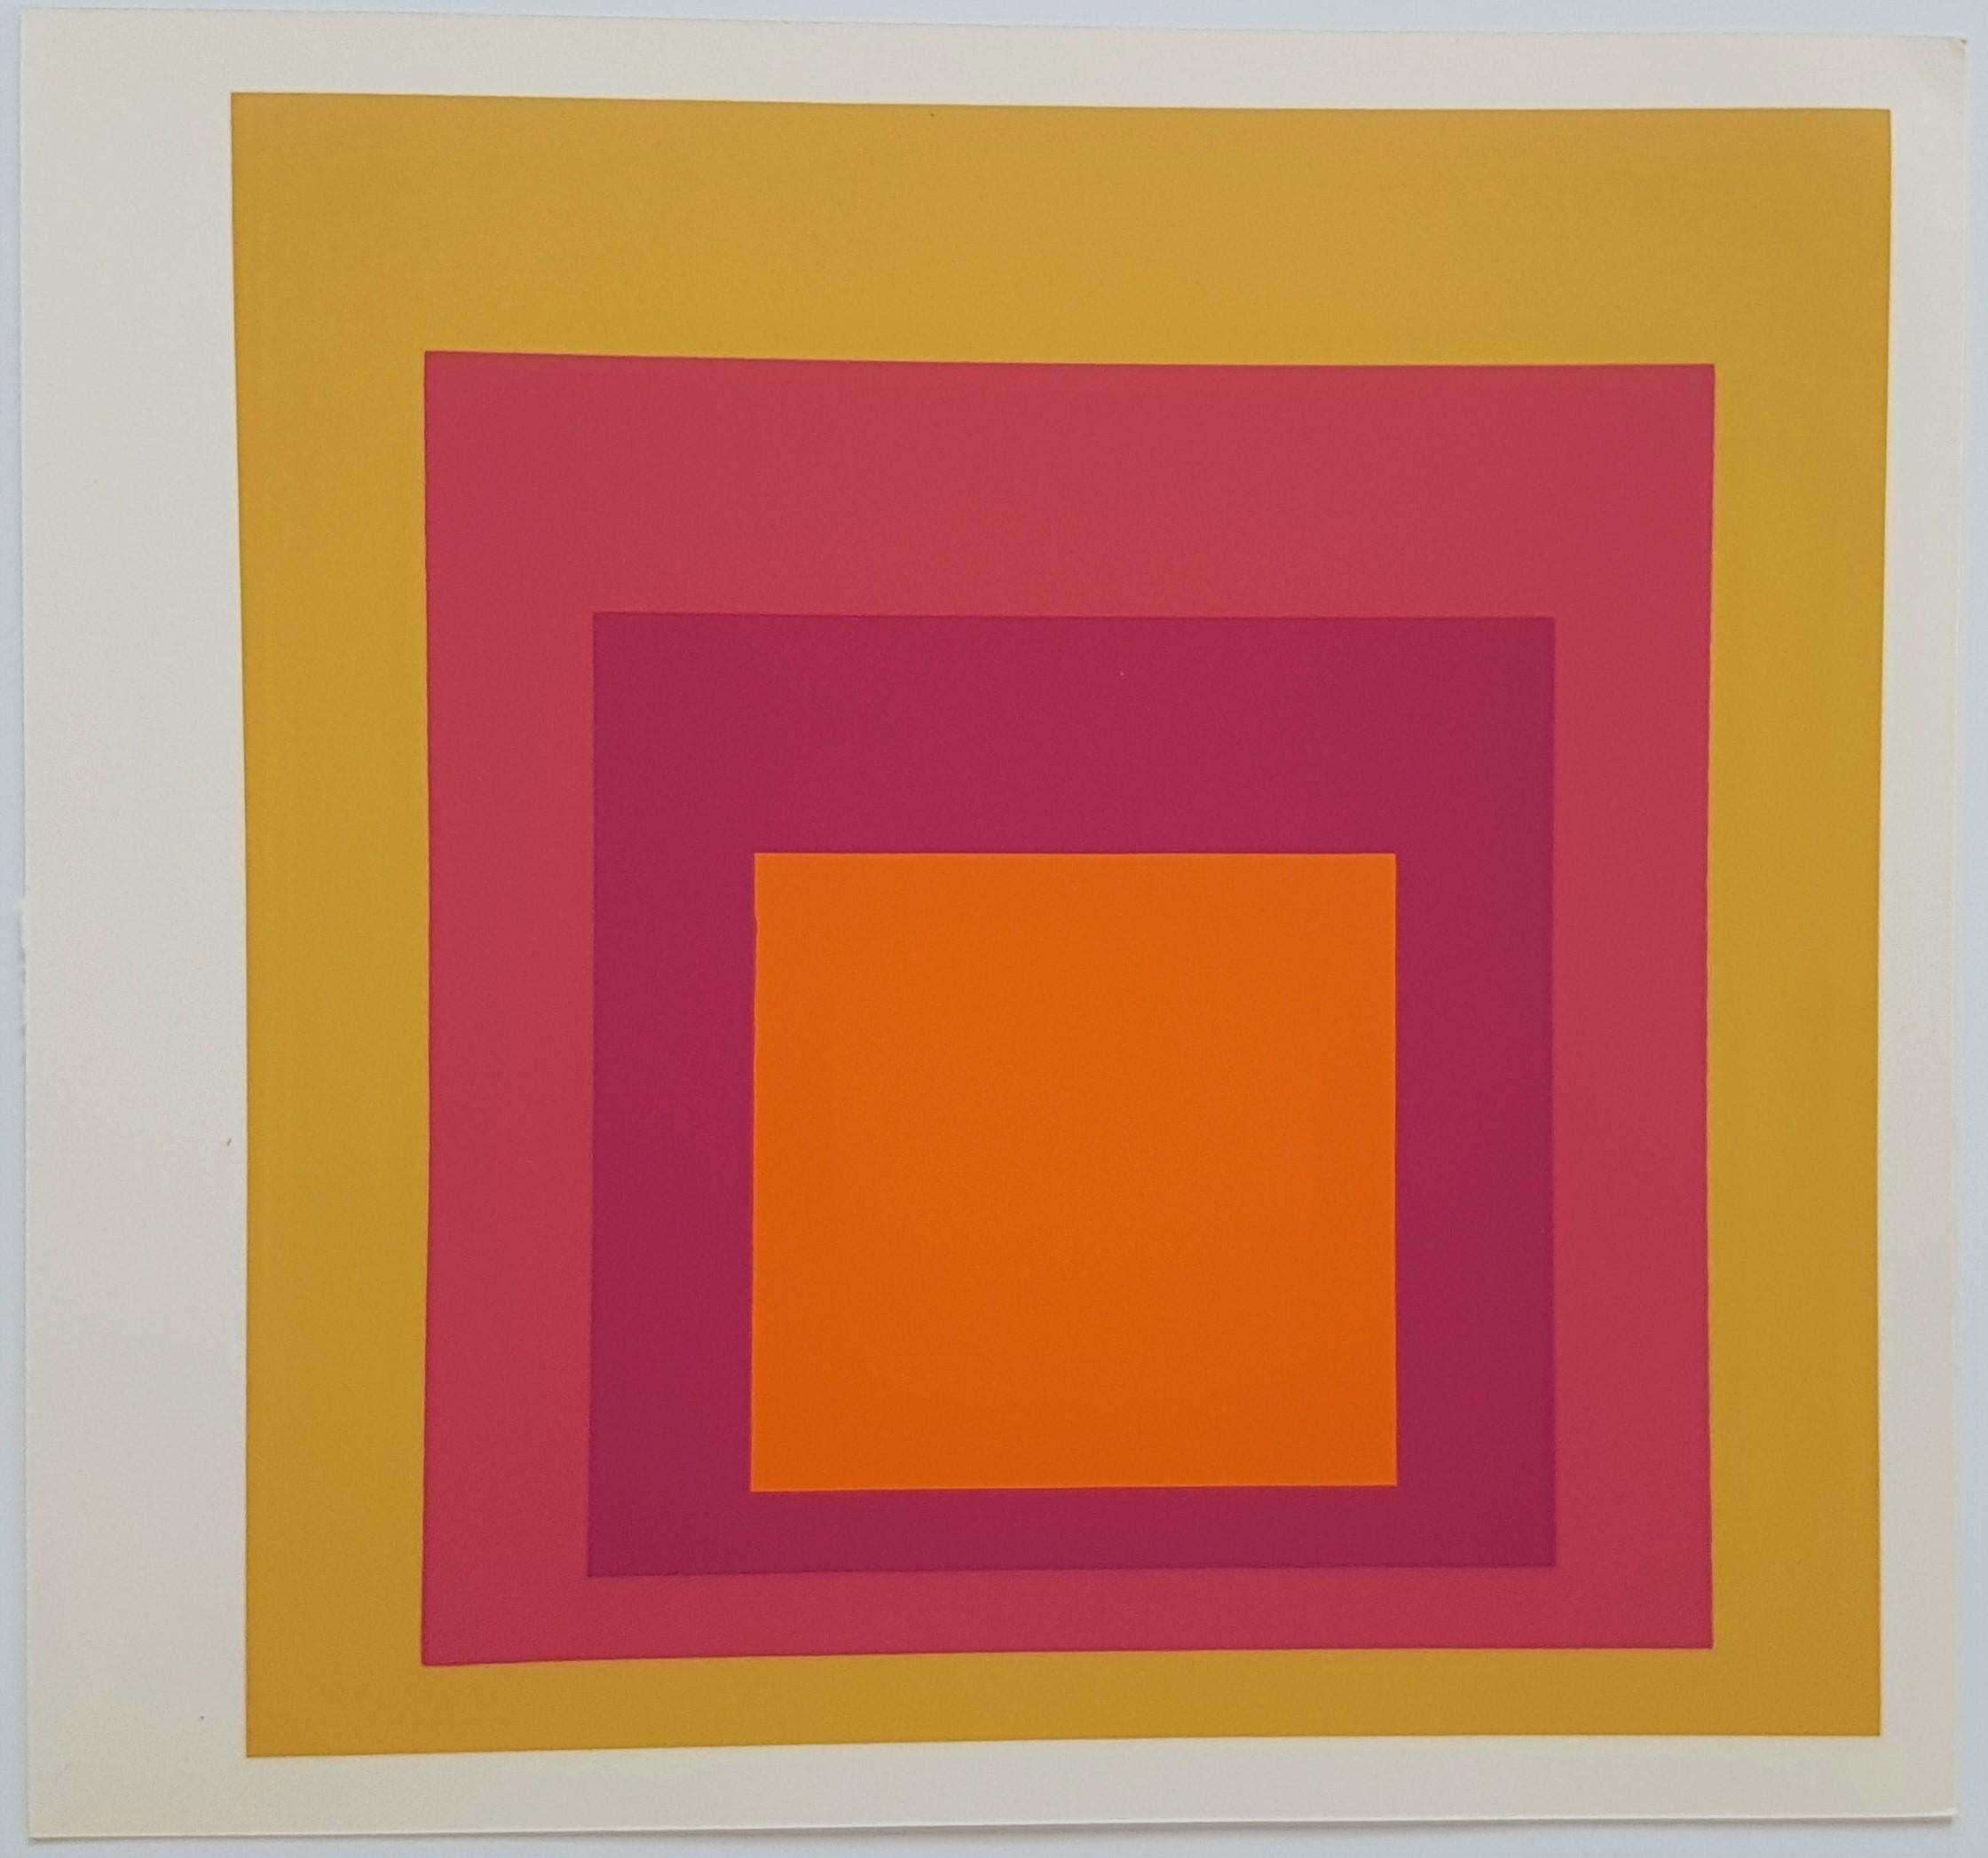 (after) Josef Albers Figurative Print - Homage to the Square: La Tehuana (from "Albers")